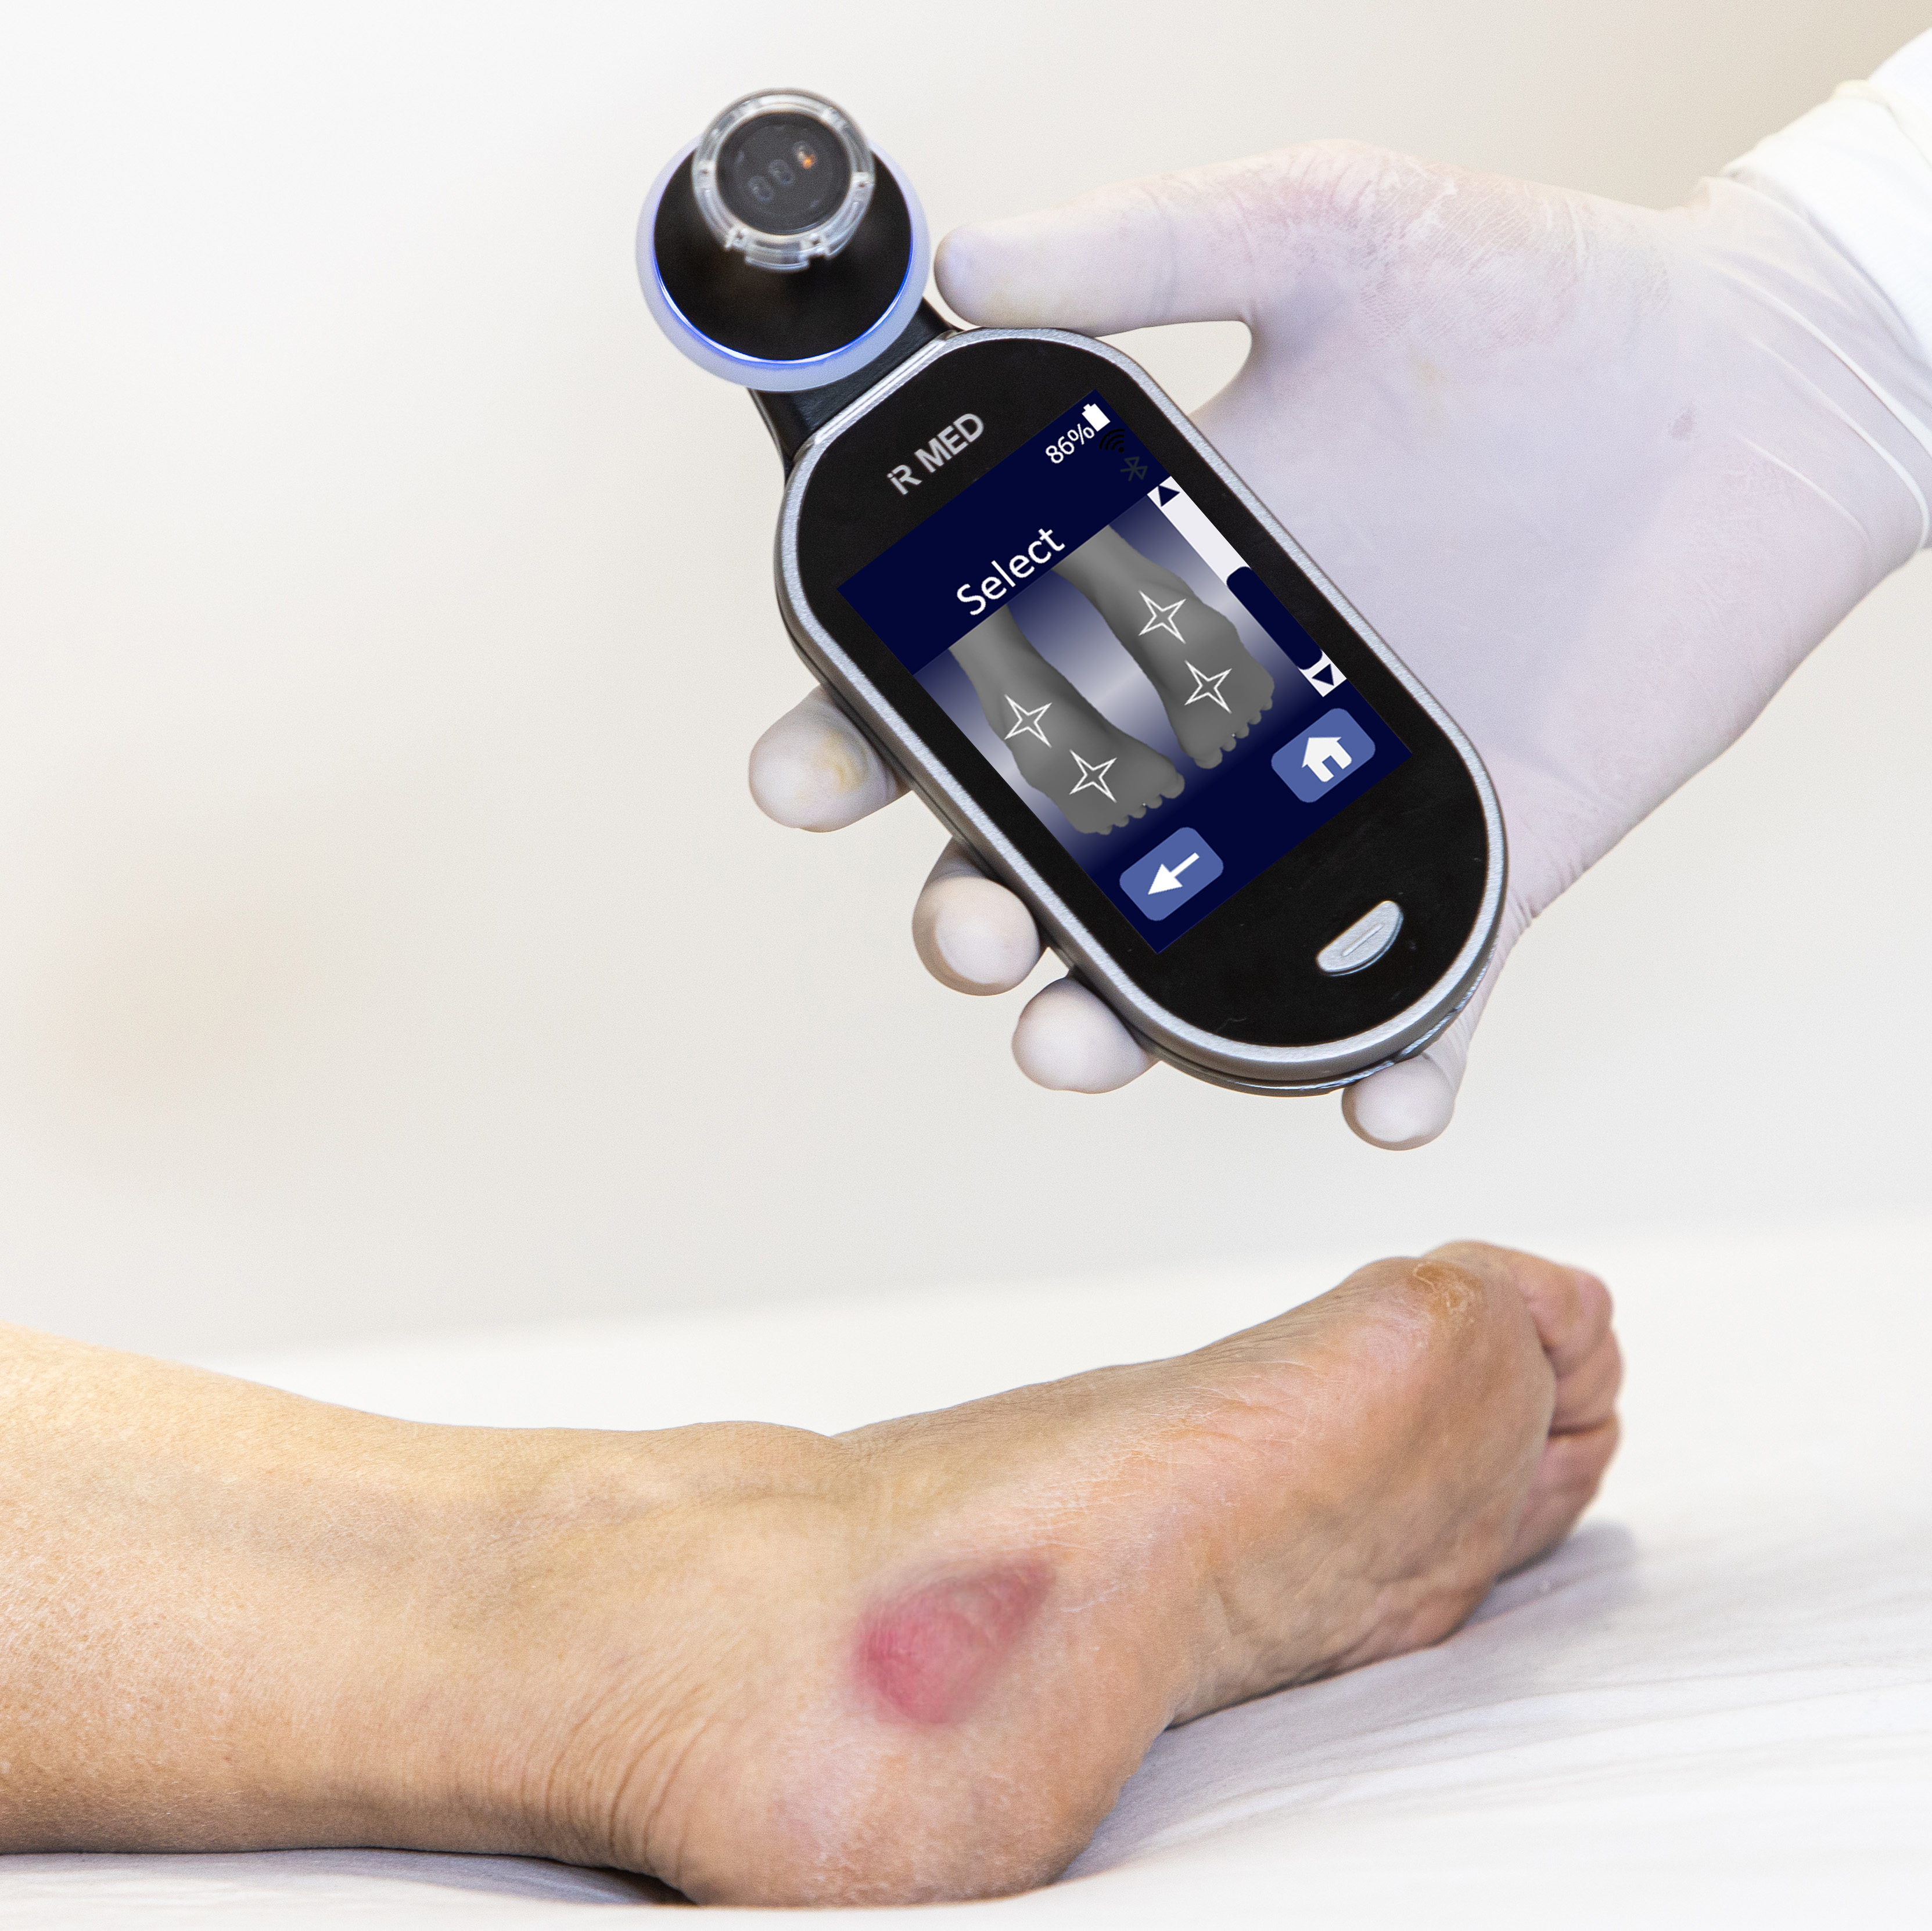 New Clinical Efficacy Data for Detection of Pressure Injuries with its AI- Based PressureSafe™ Device